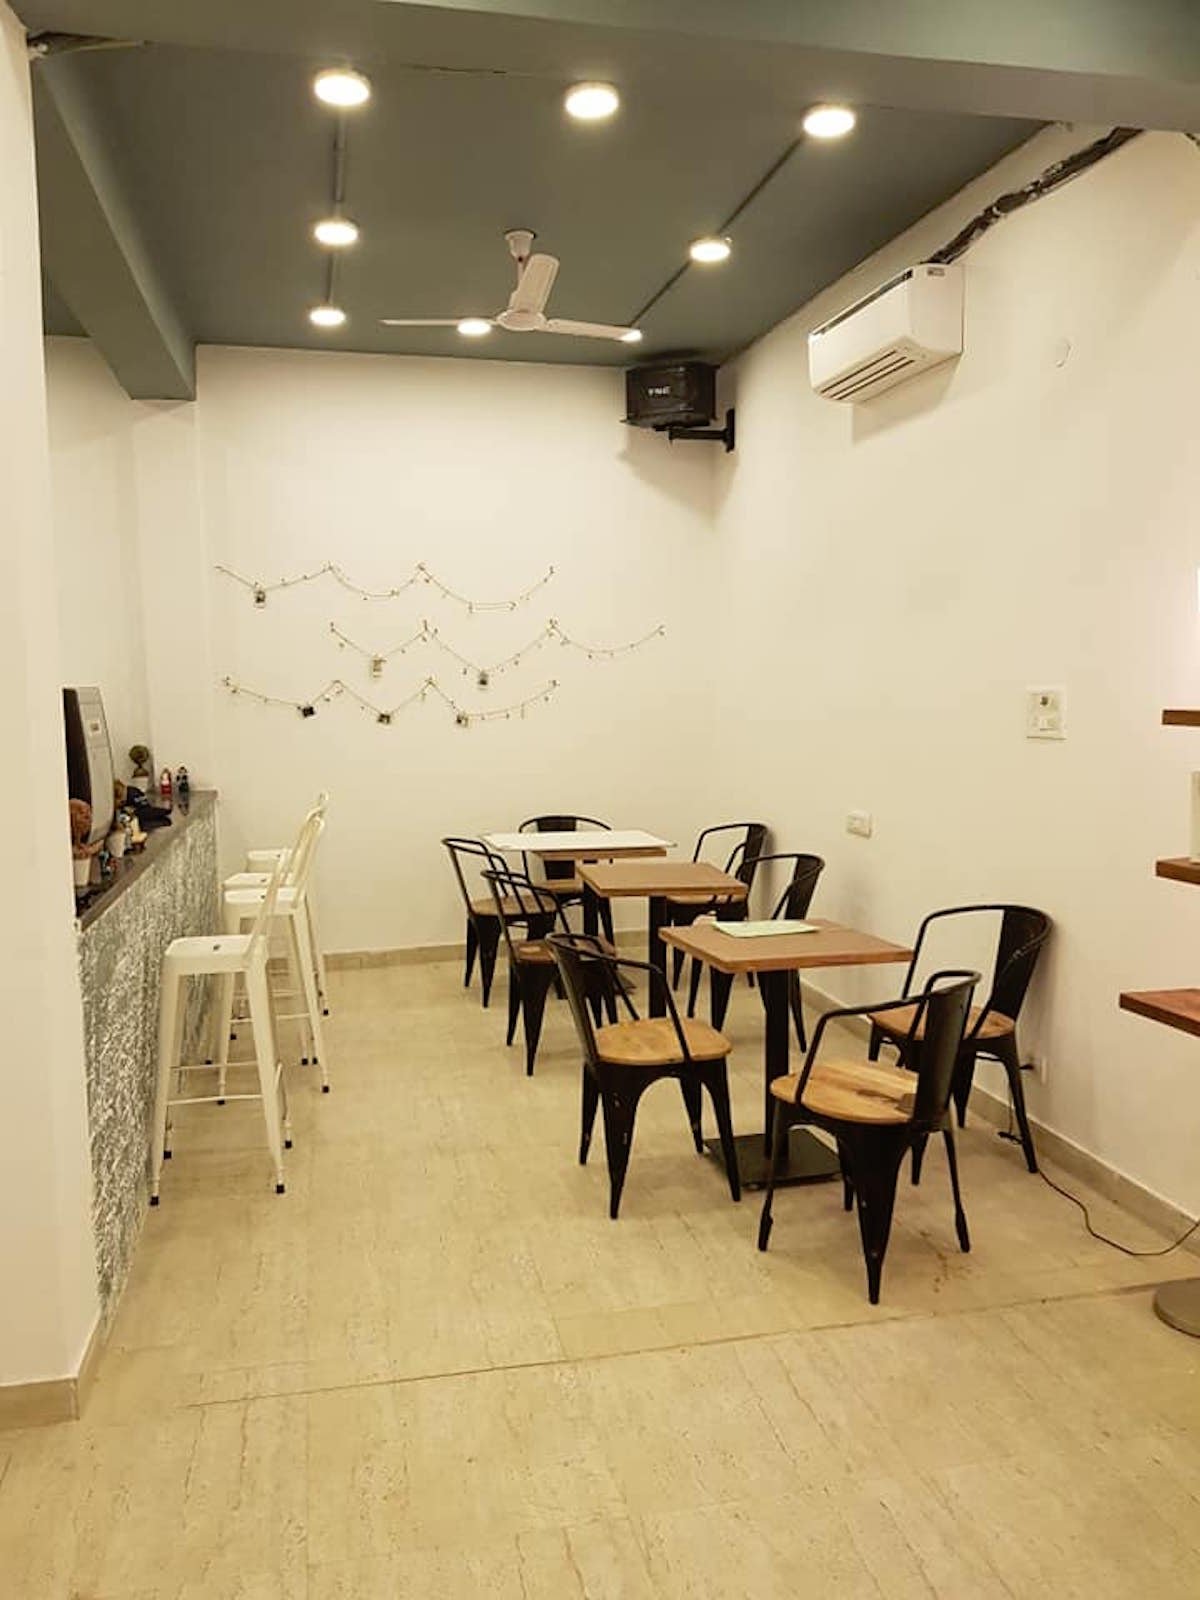 Relish Over Korean Cuisine And Get Your Nails Done At This Cafe In Safdarjung